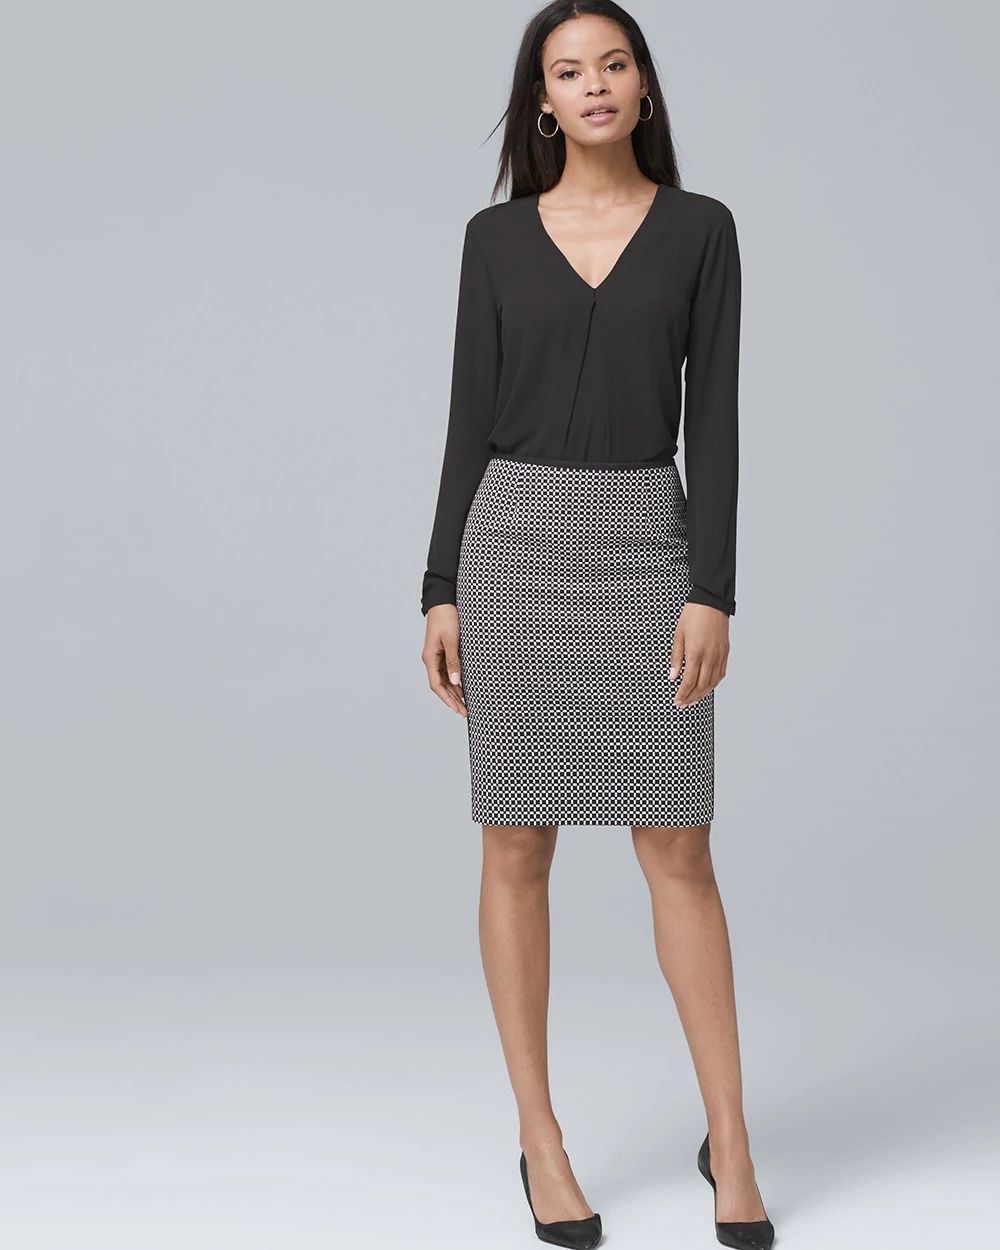 Geometric Pencil Skirt click to view larger image.